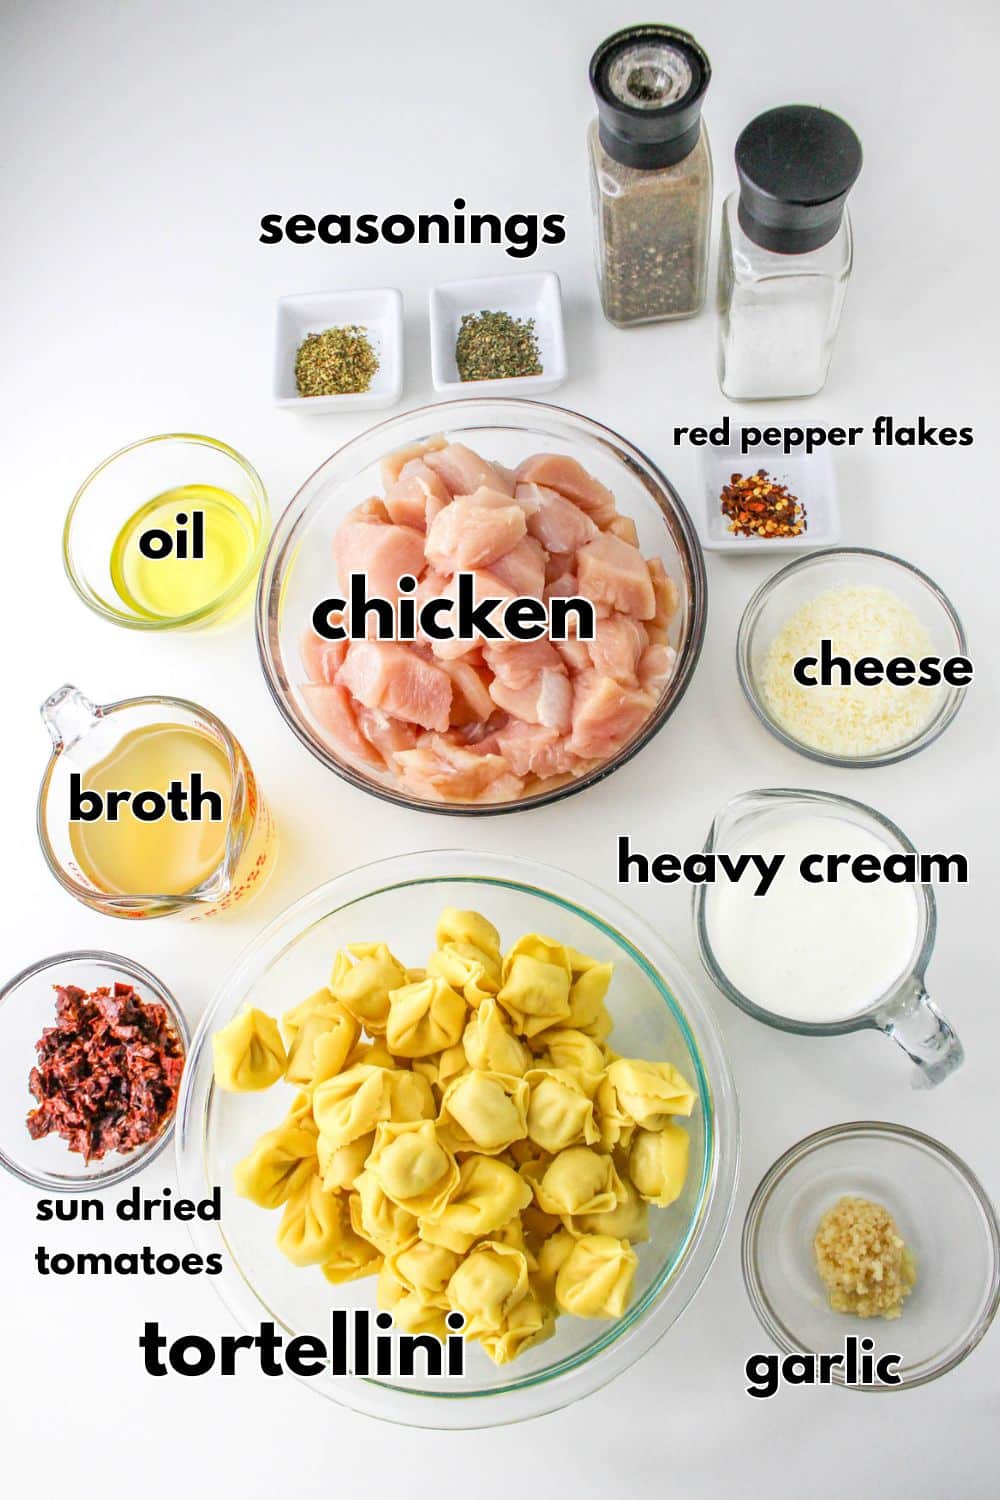 ingredients in individual bowls on table - chicken, tortellini, heavy cream, broth, sundried tomatoes, garlic, seasonings, and oil